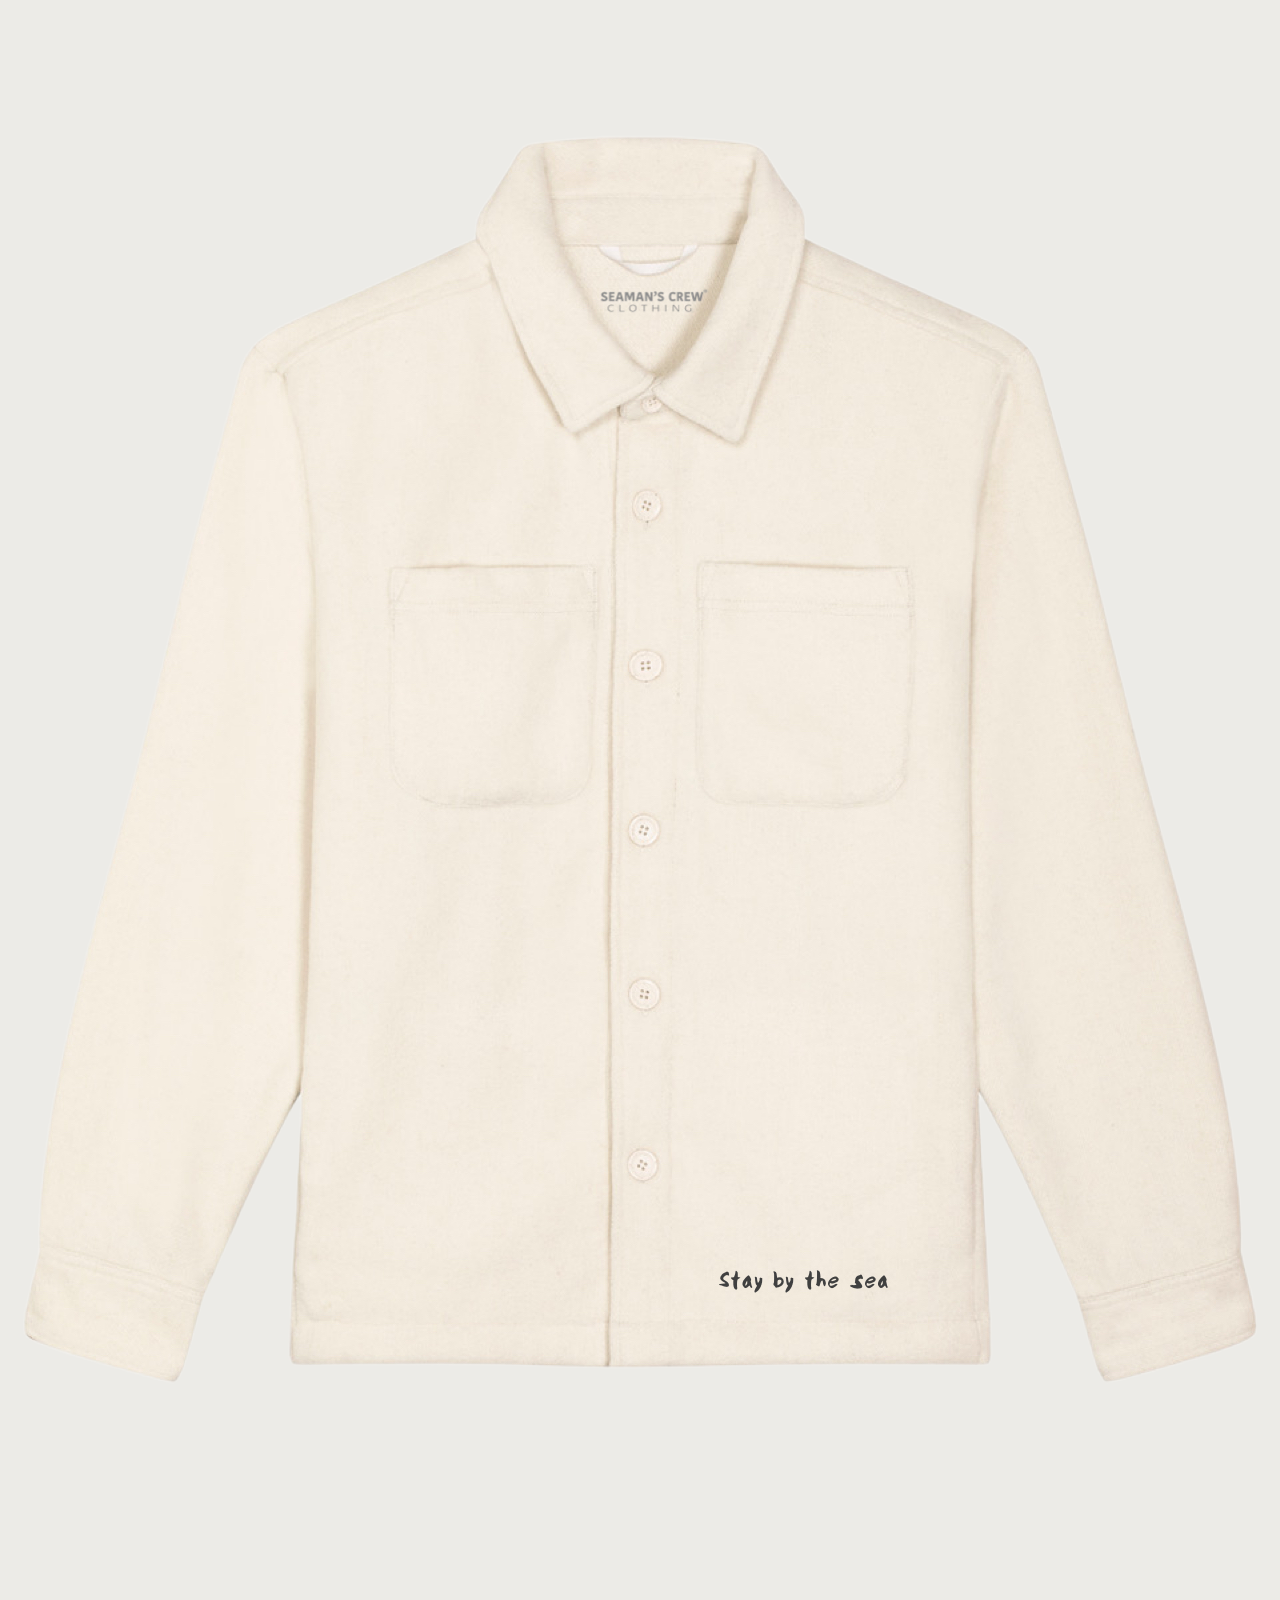 Stay by the Sea embroidered overshirt - Seaman&